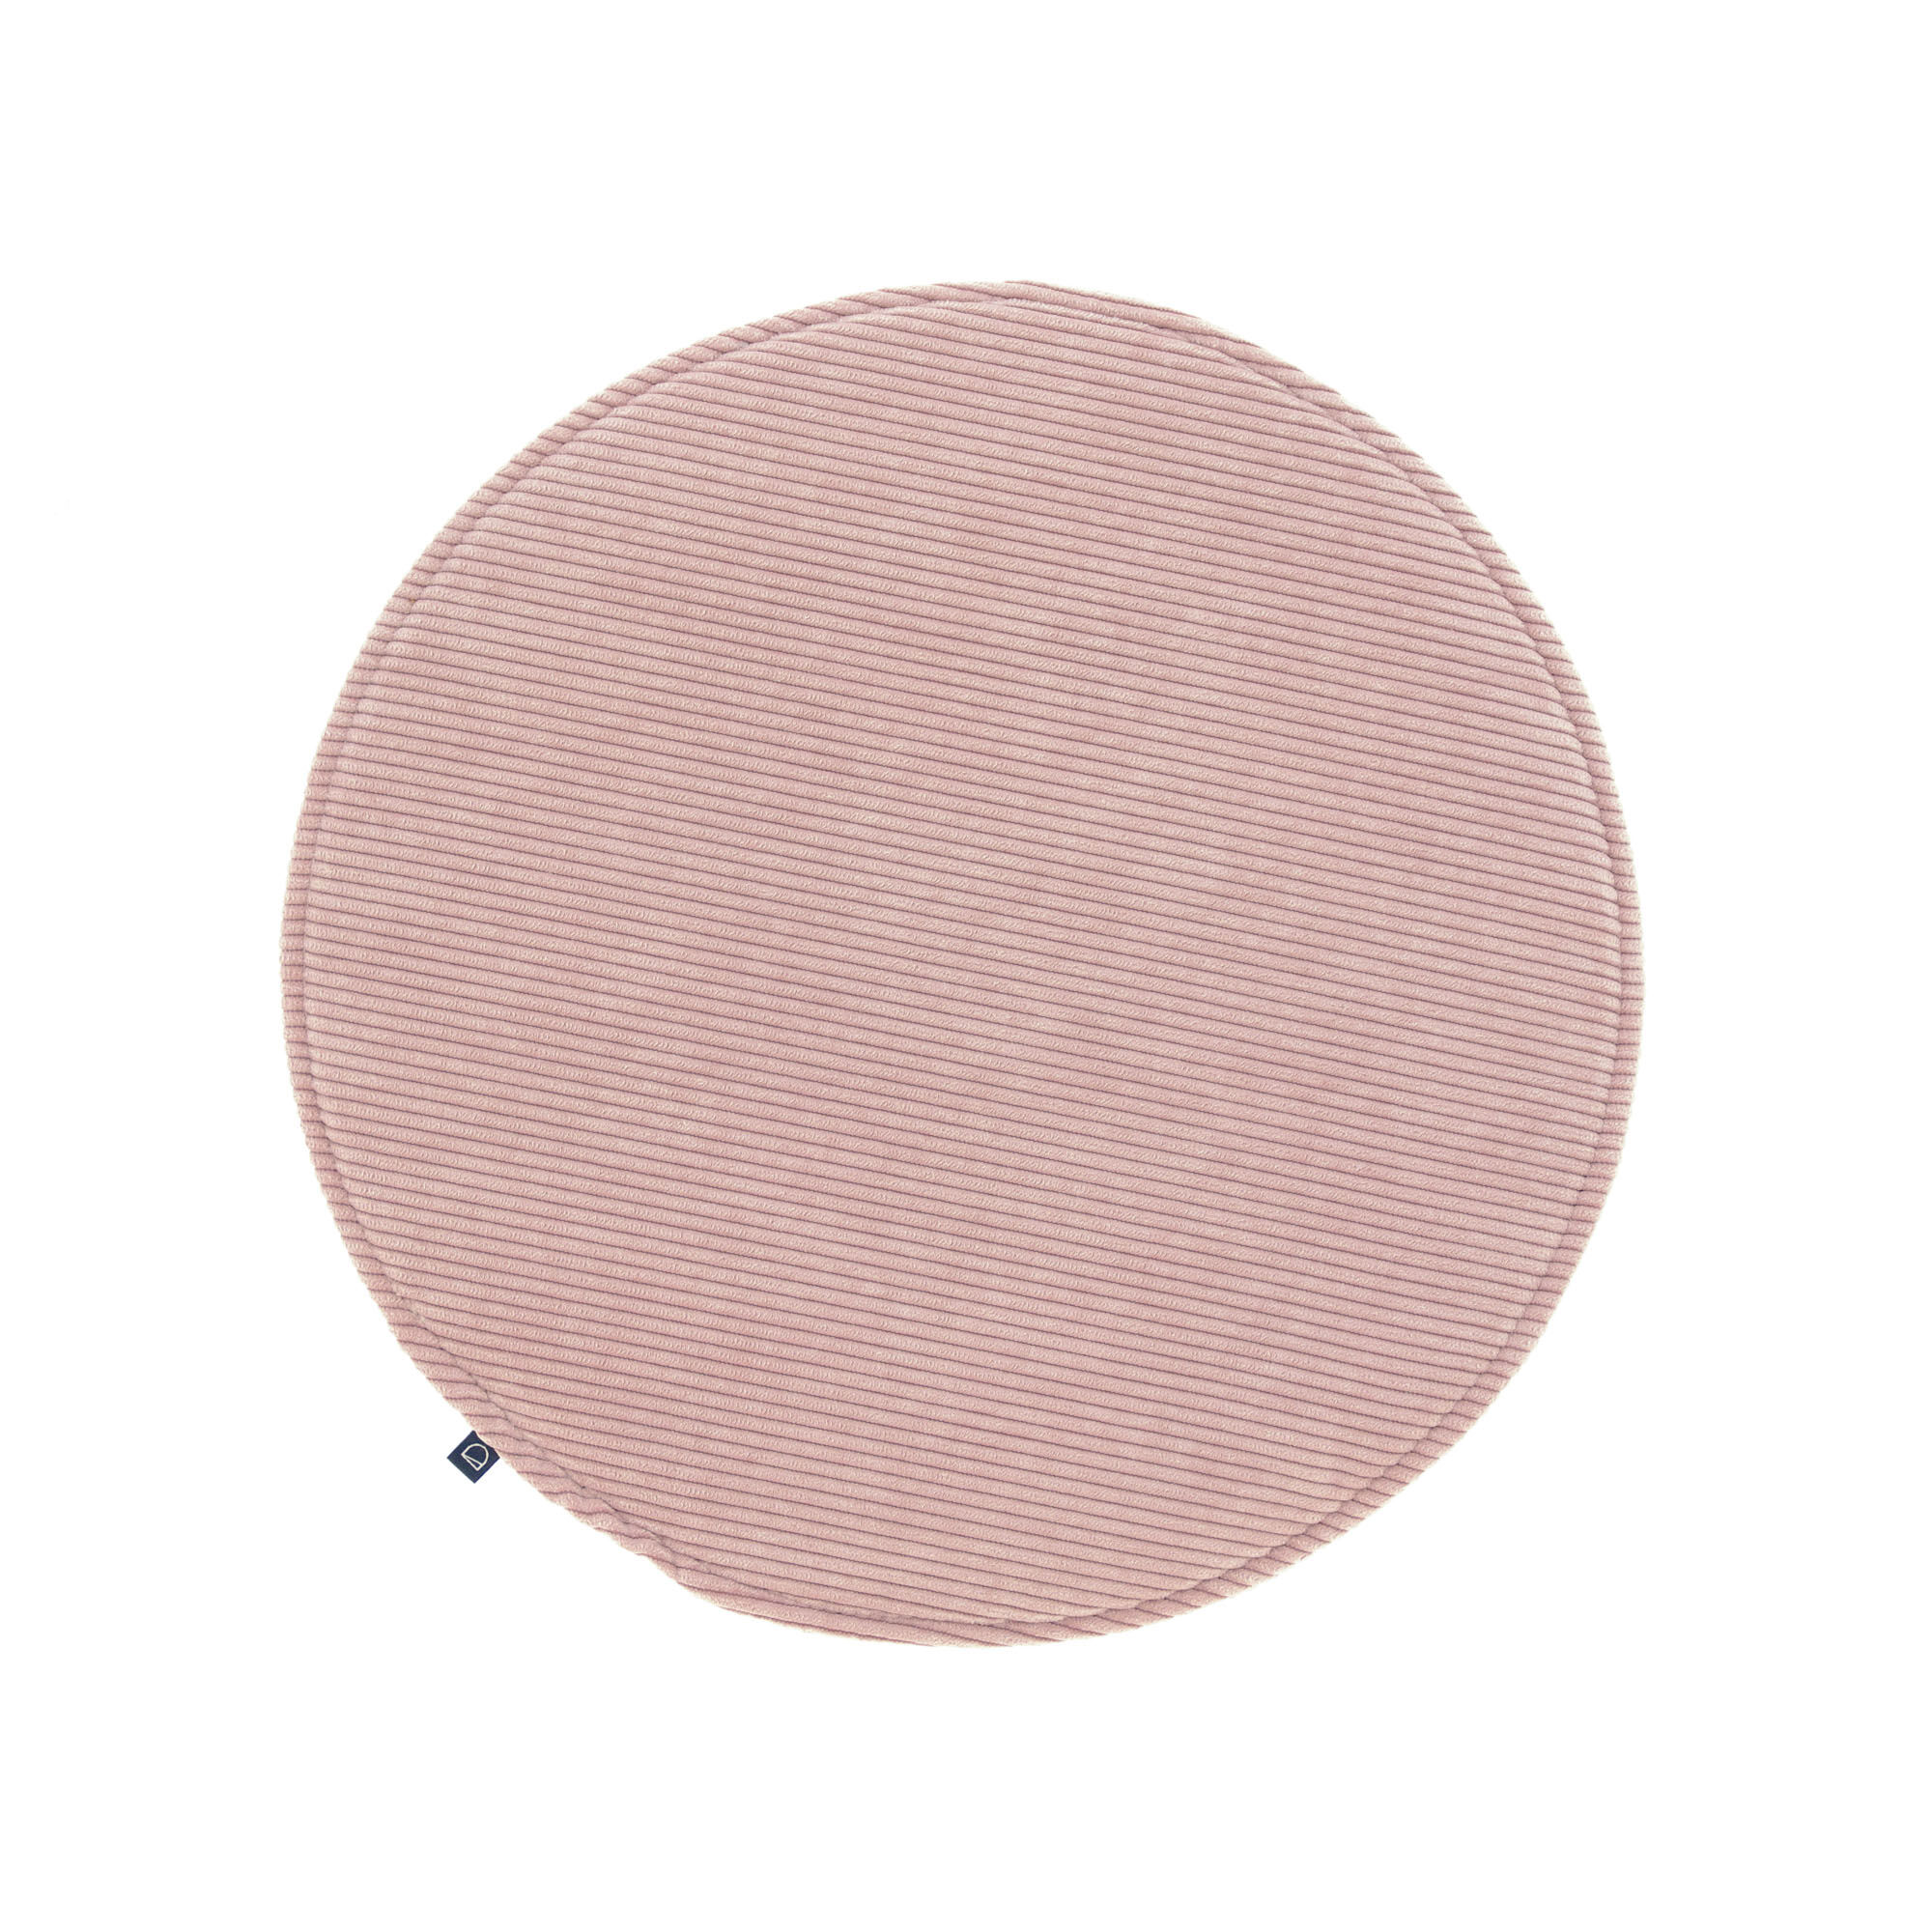 Kave Home Sora round corduroy chair cushion in pink, 35 cm